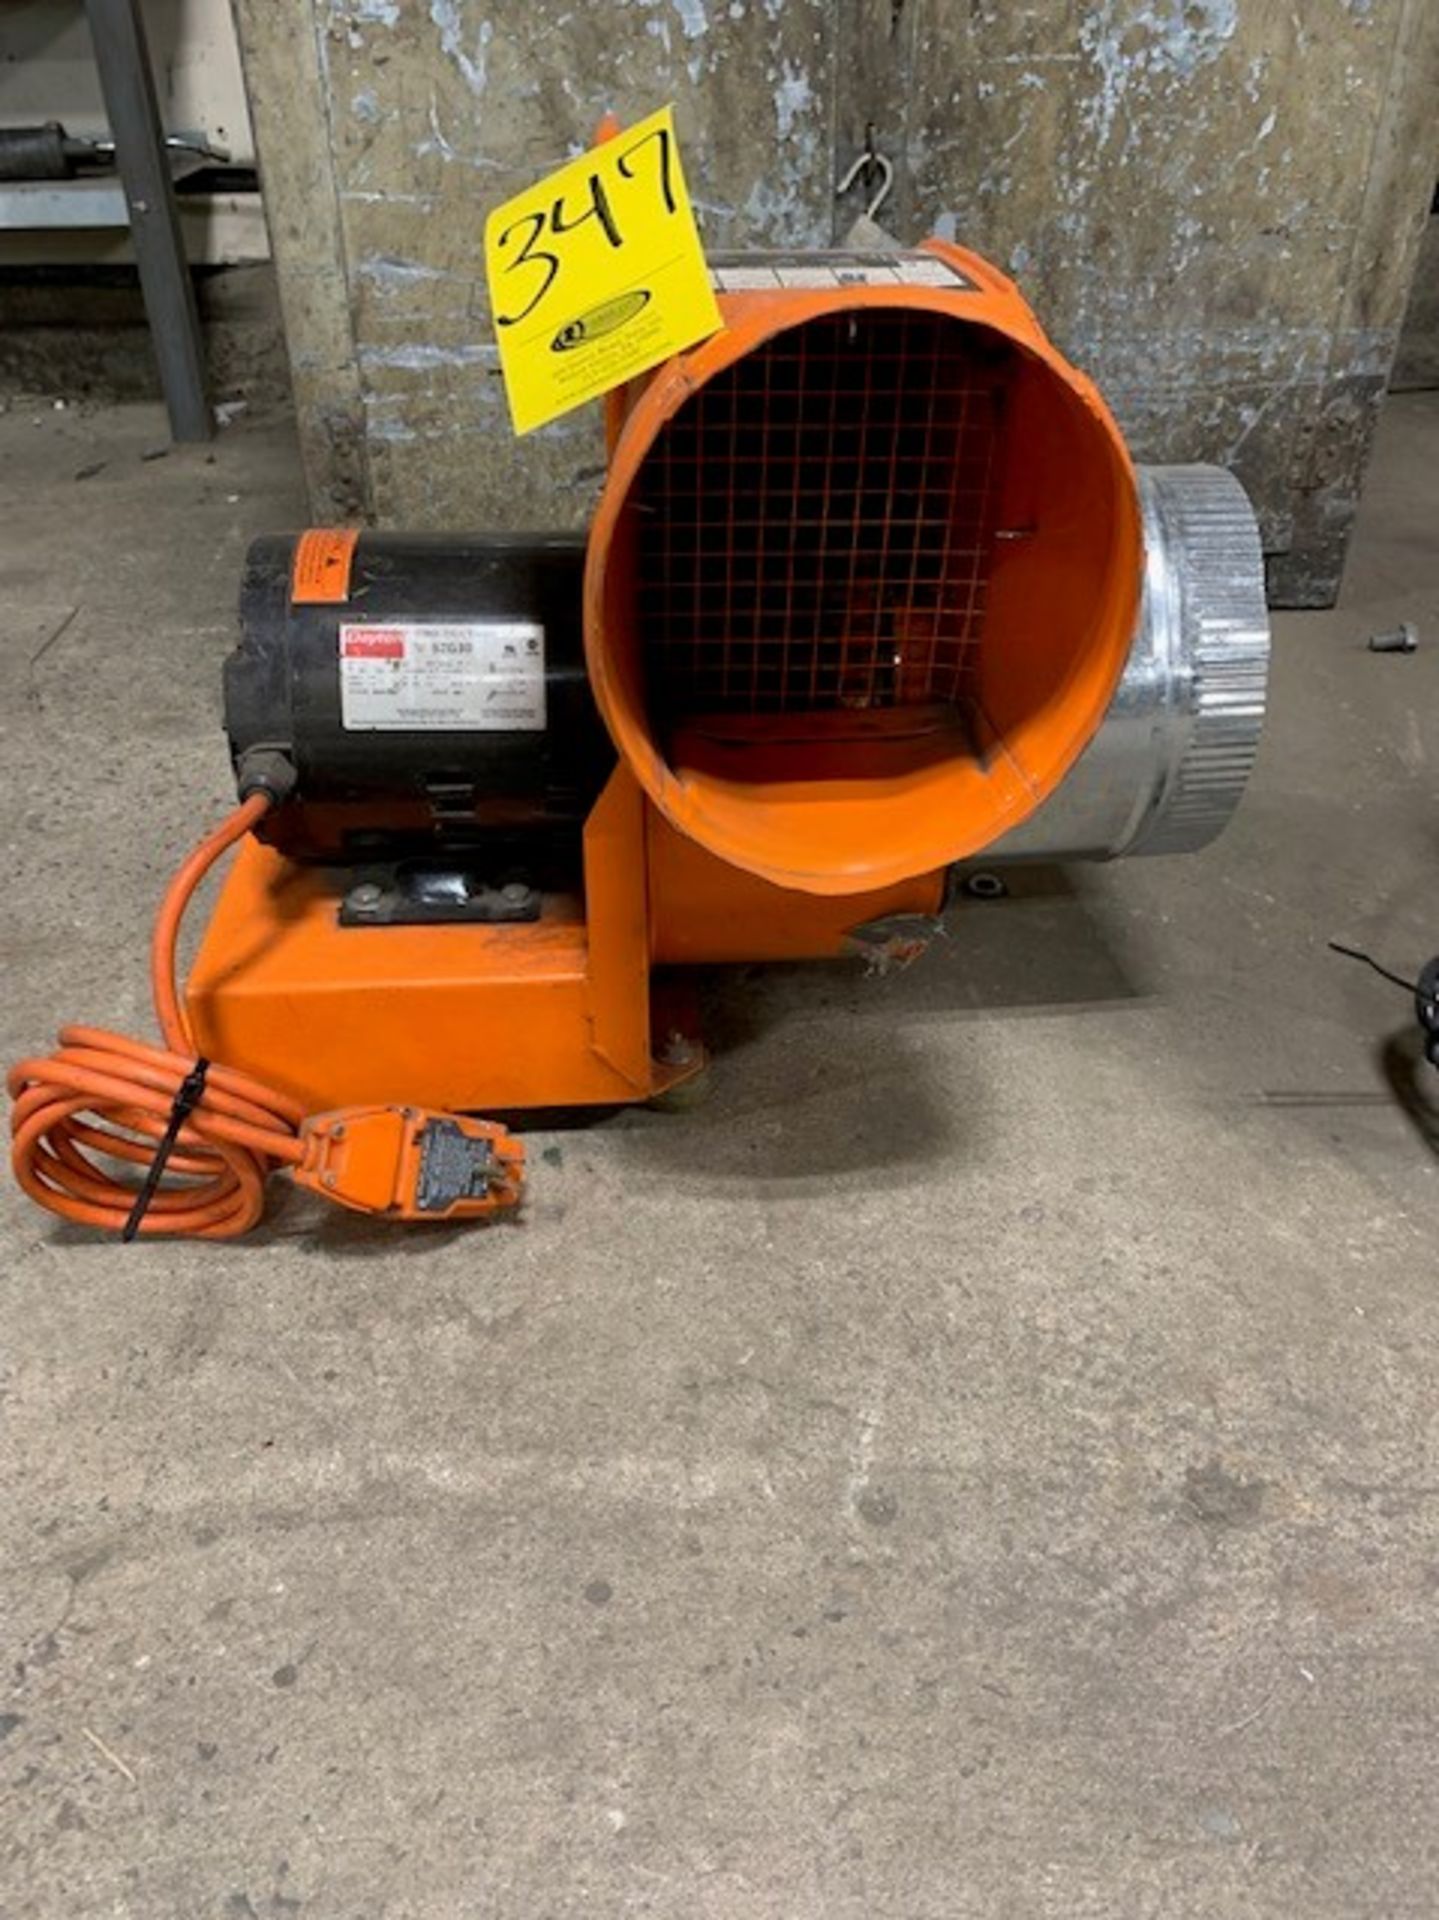 AIR SYSTEMS SVB-E8EC HIGH OUTPUT BLOWER, 1/2 HP, DAYTON DIRECT DRIVE MOTOR, 1390 CFM - Image 4 of 4